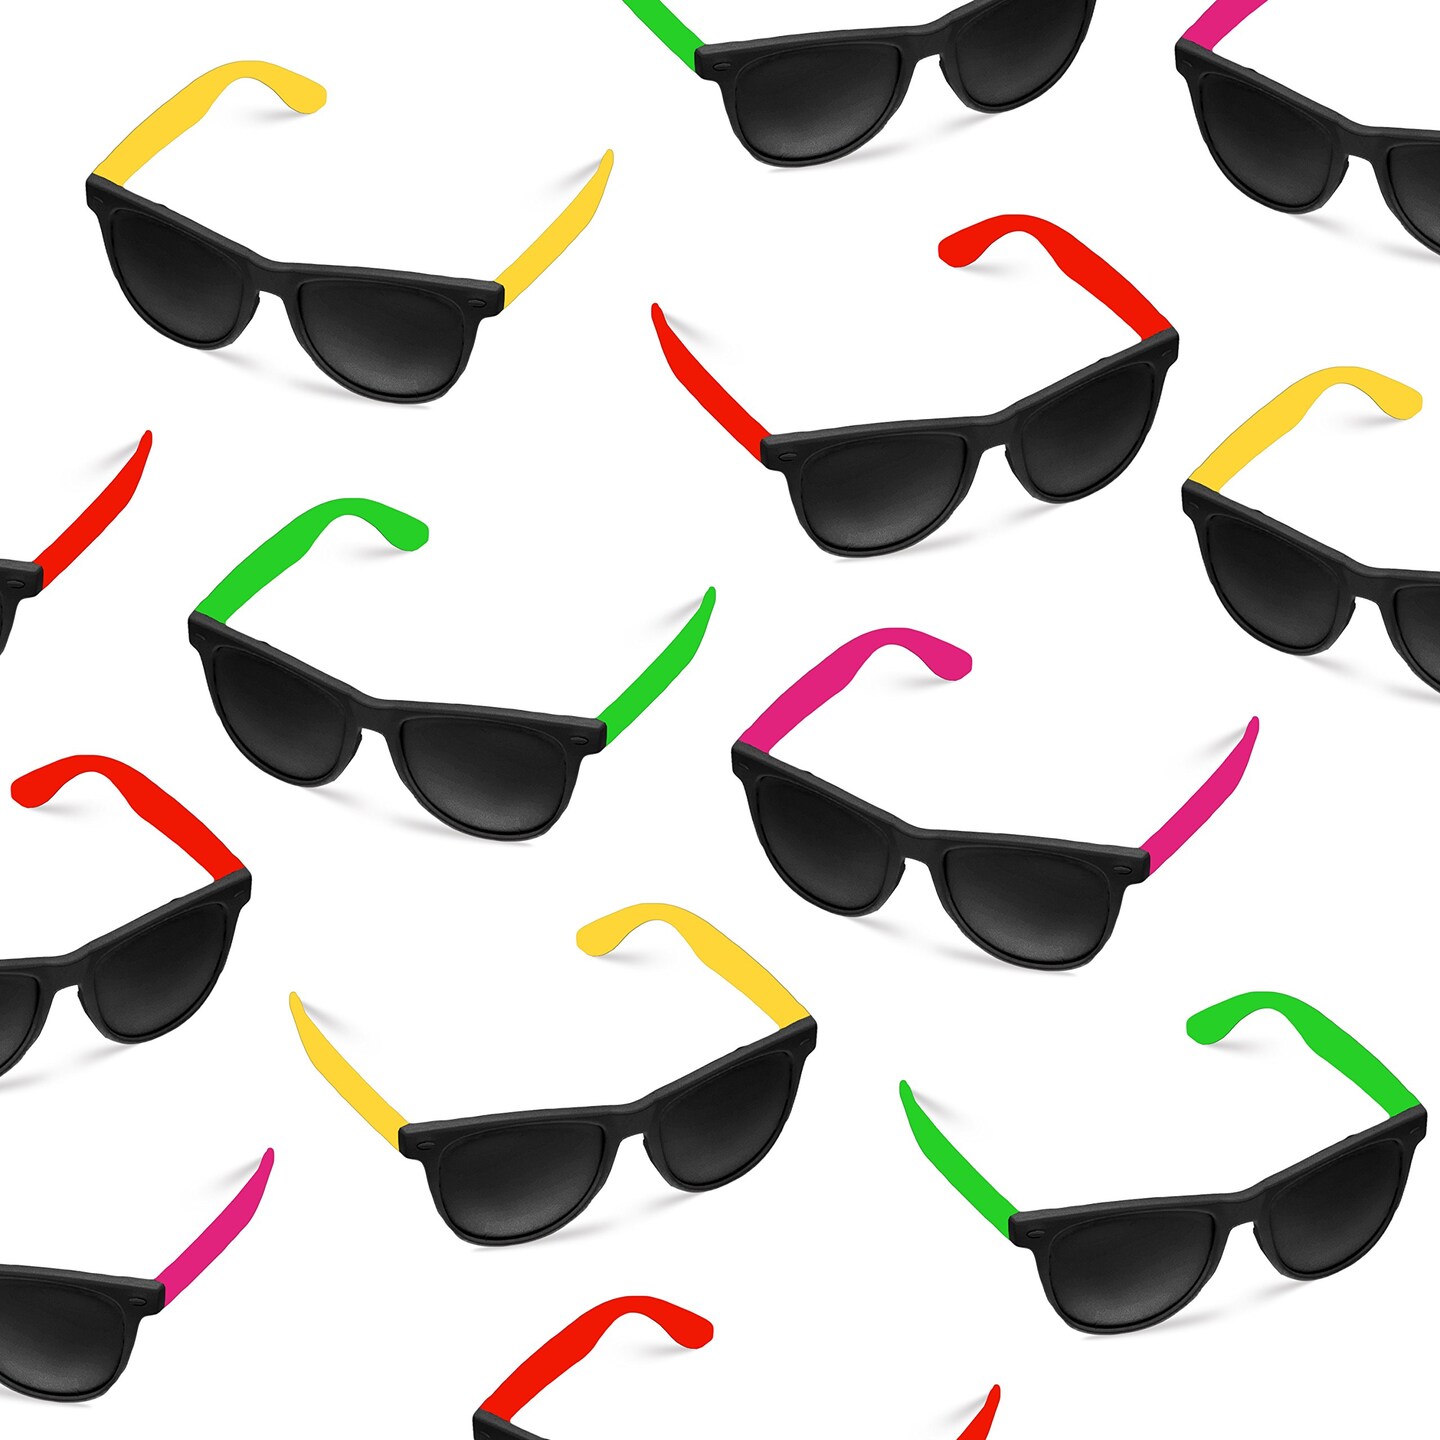 24 Pack 80&#x27;s Style Neon Party Sunglasses - Fun Gift, Party Favors, Party Toys, Goody Bag Favors